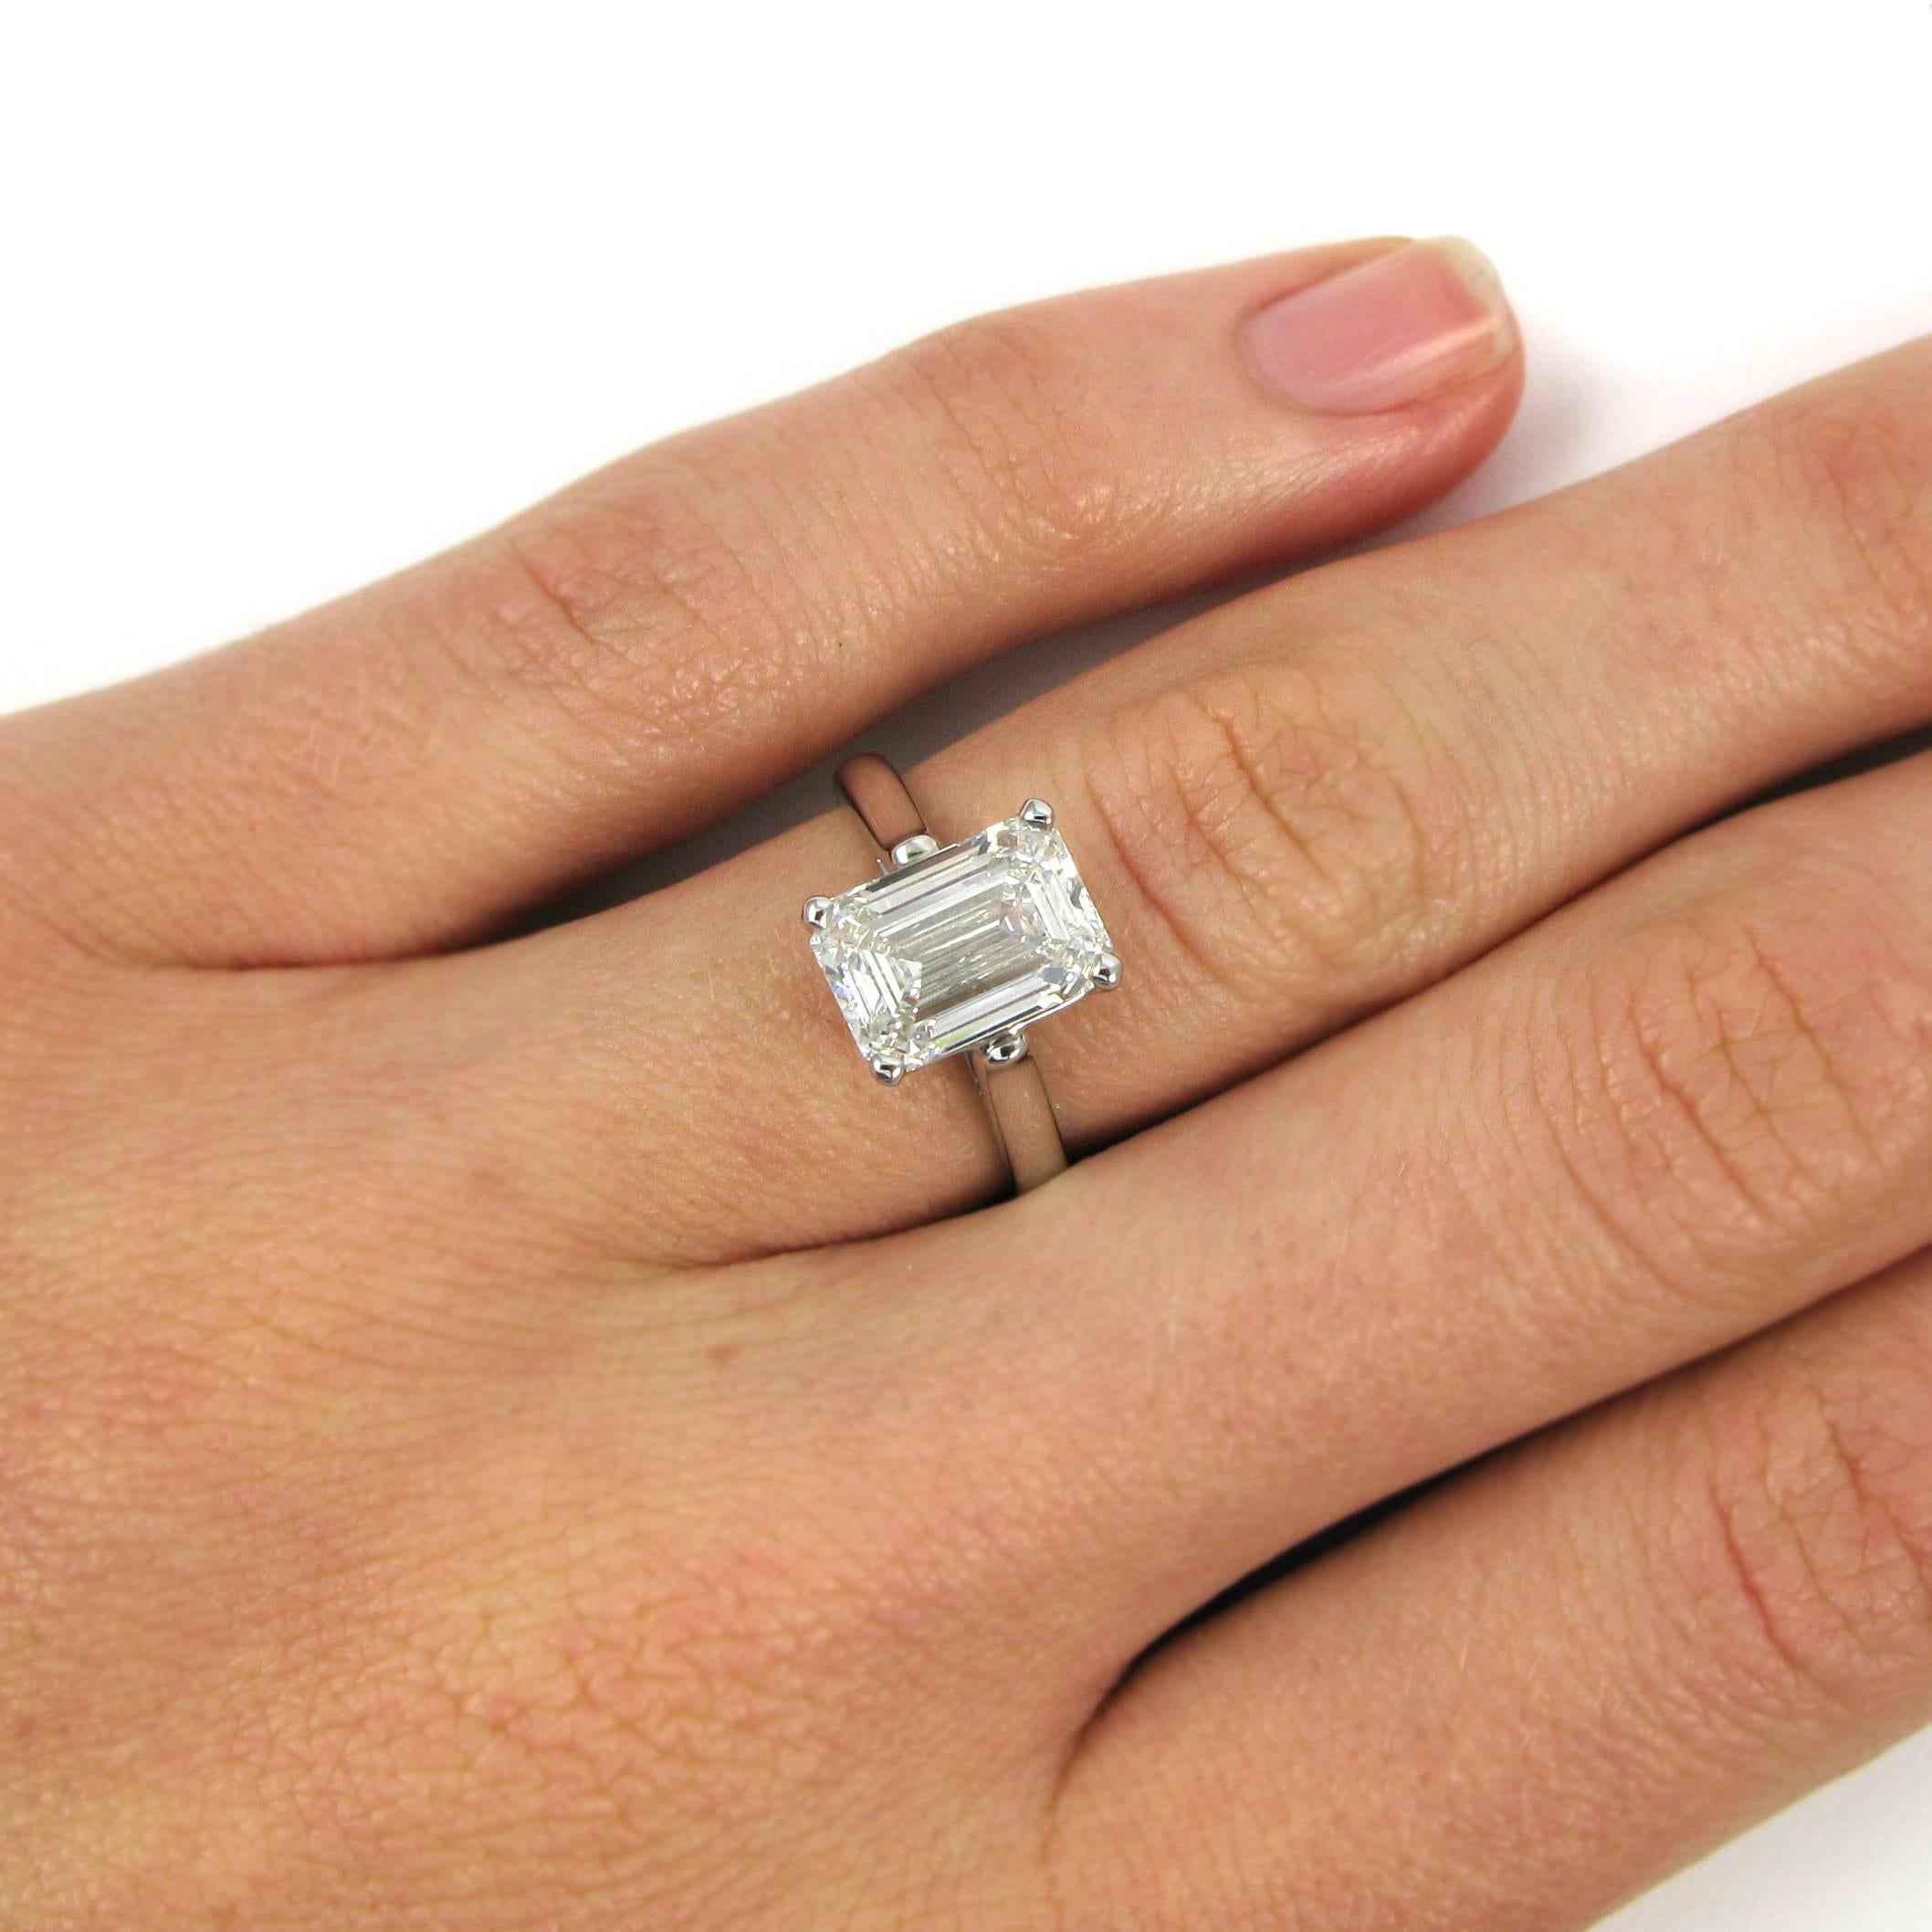 Lovely and classic solitaire ring by American jeweler Tiffany & Co. This ring centers on a 3.09 carat emerald-cut diamond with F color and VS1 clarity. The diamond is mounted simply in platinum, and the ring is stamped "TIFFANY & CO.